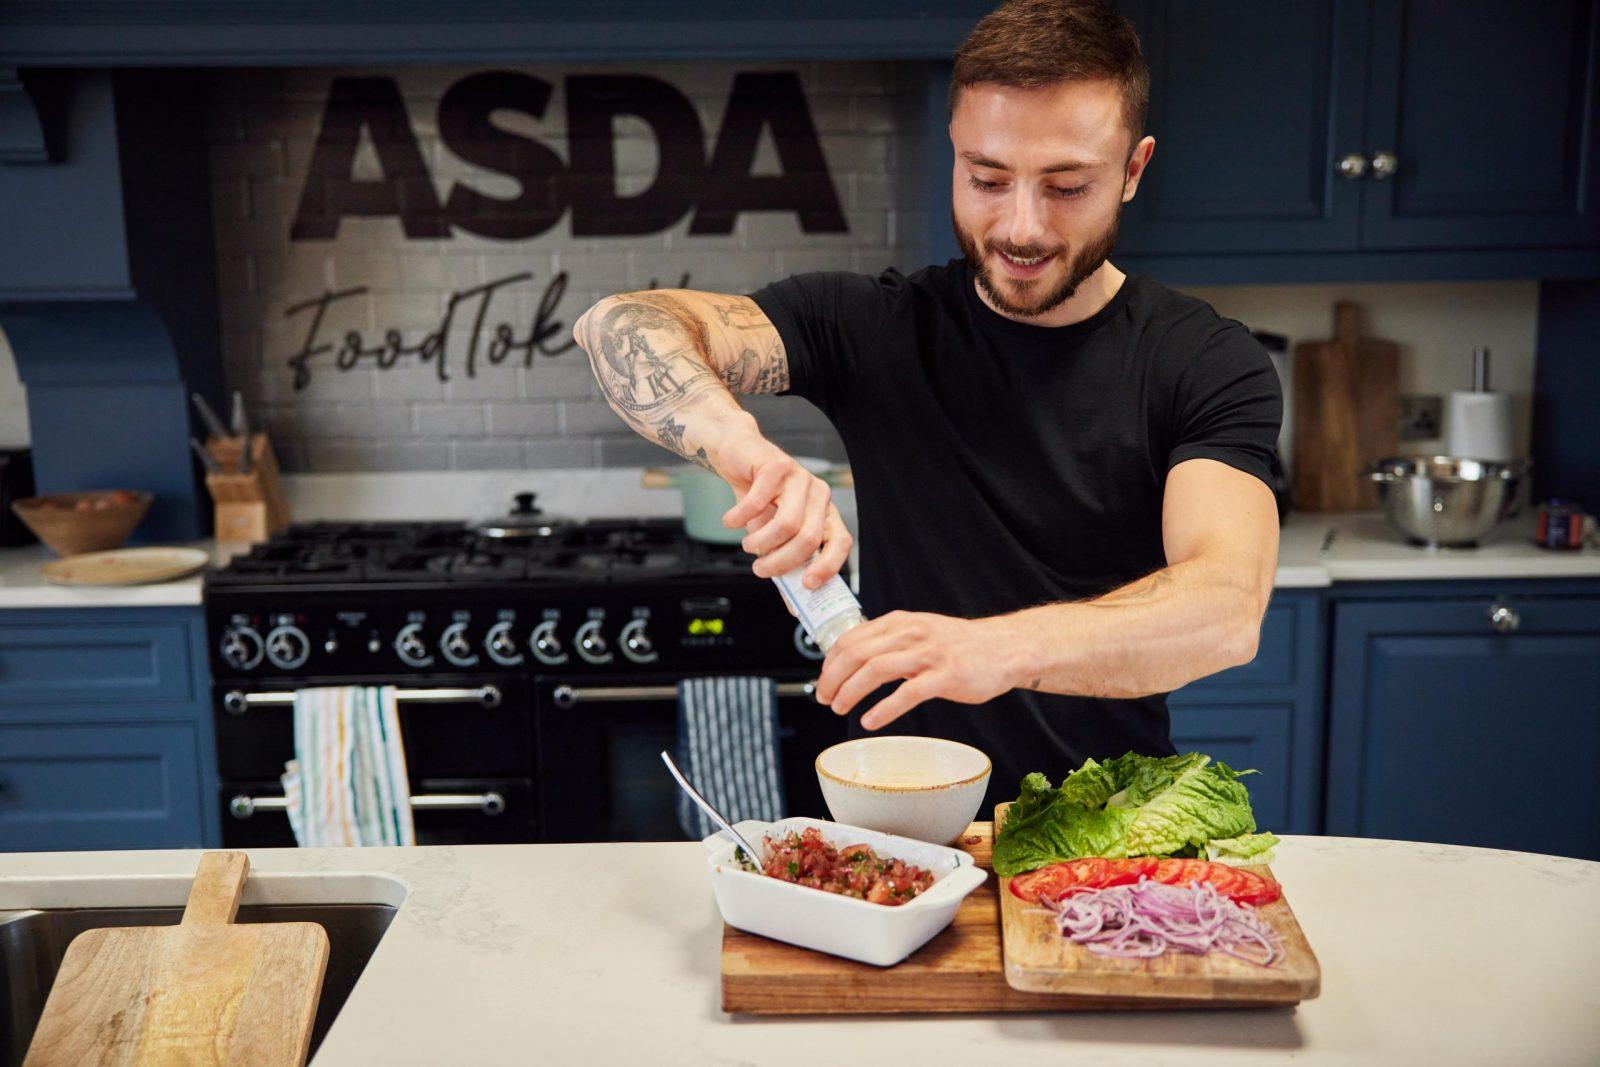 Asda launches influencer 'content house' in Yorkshire Dales